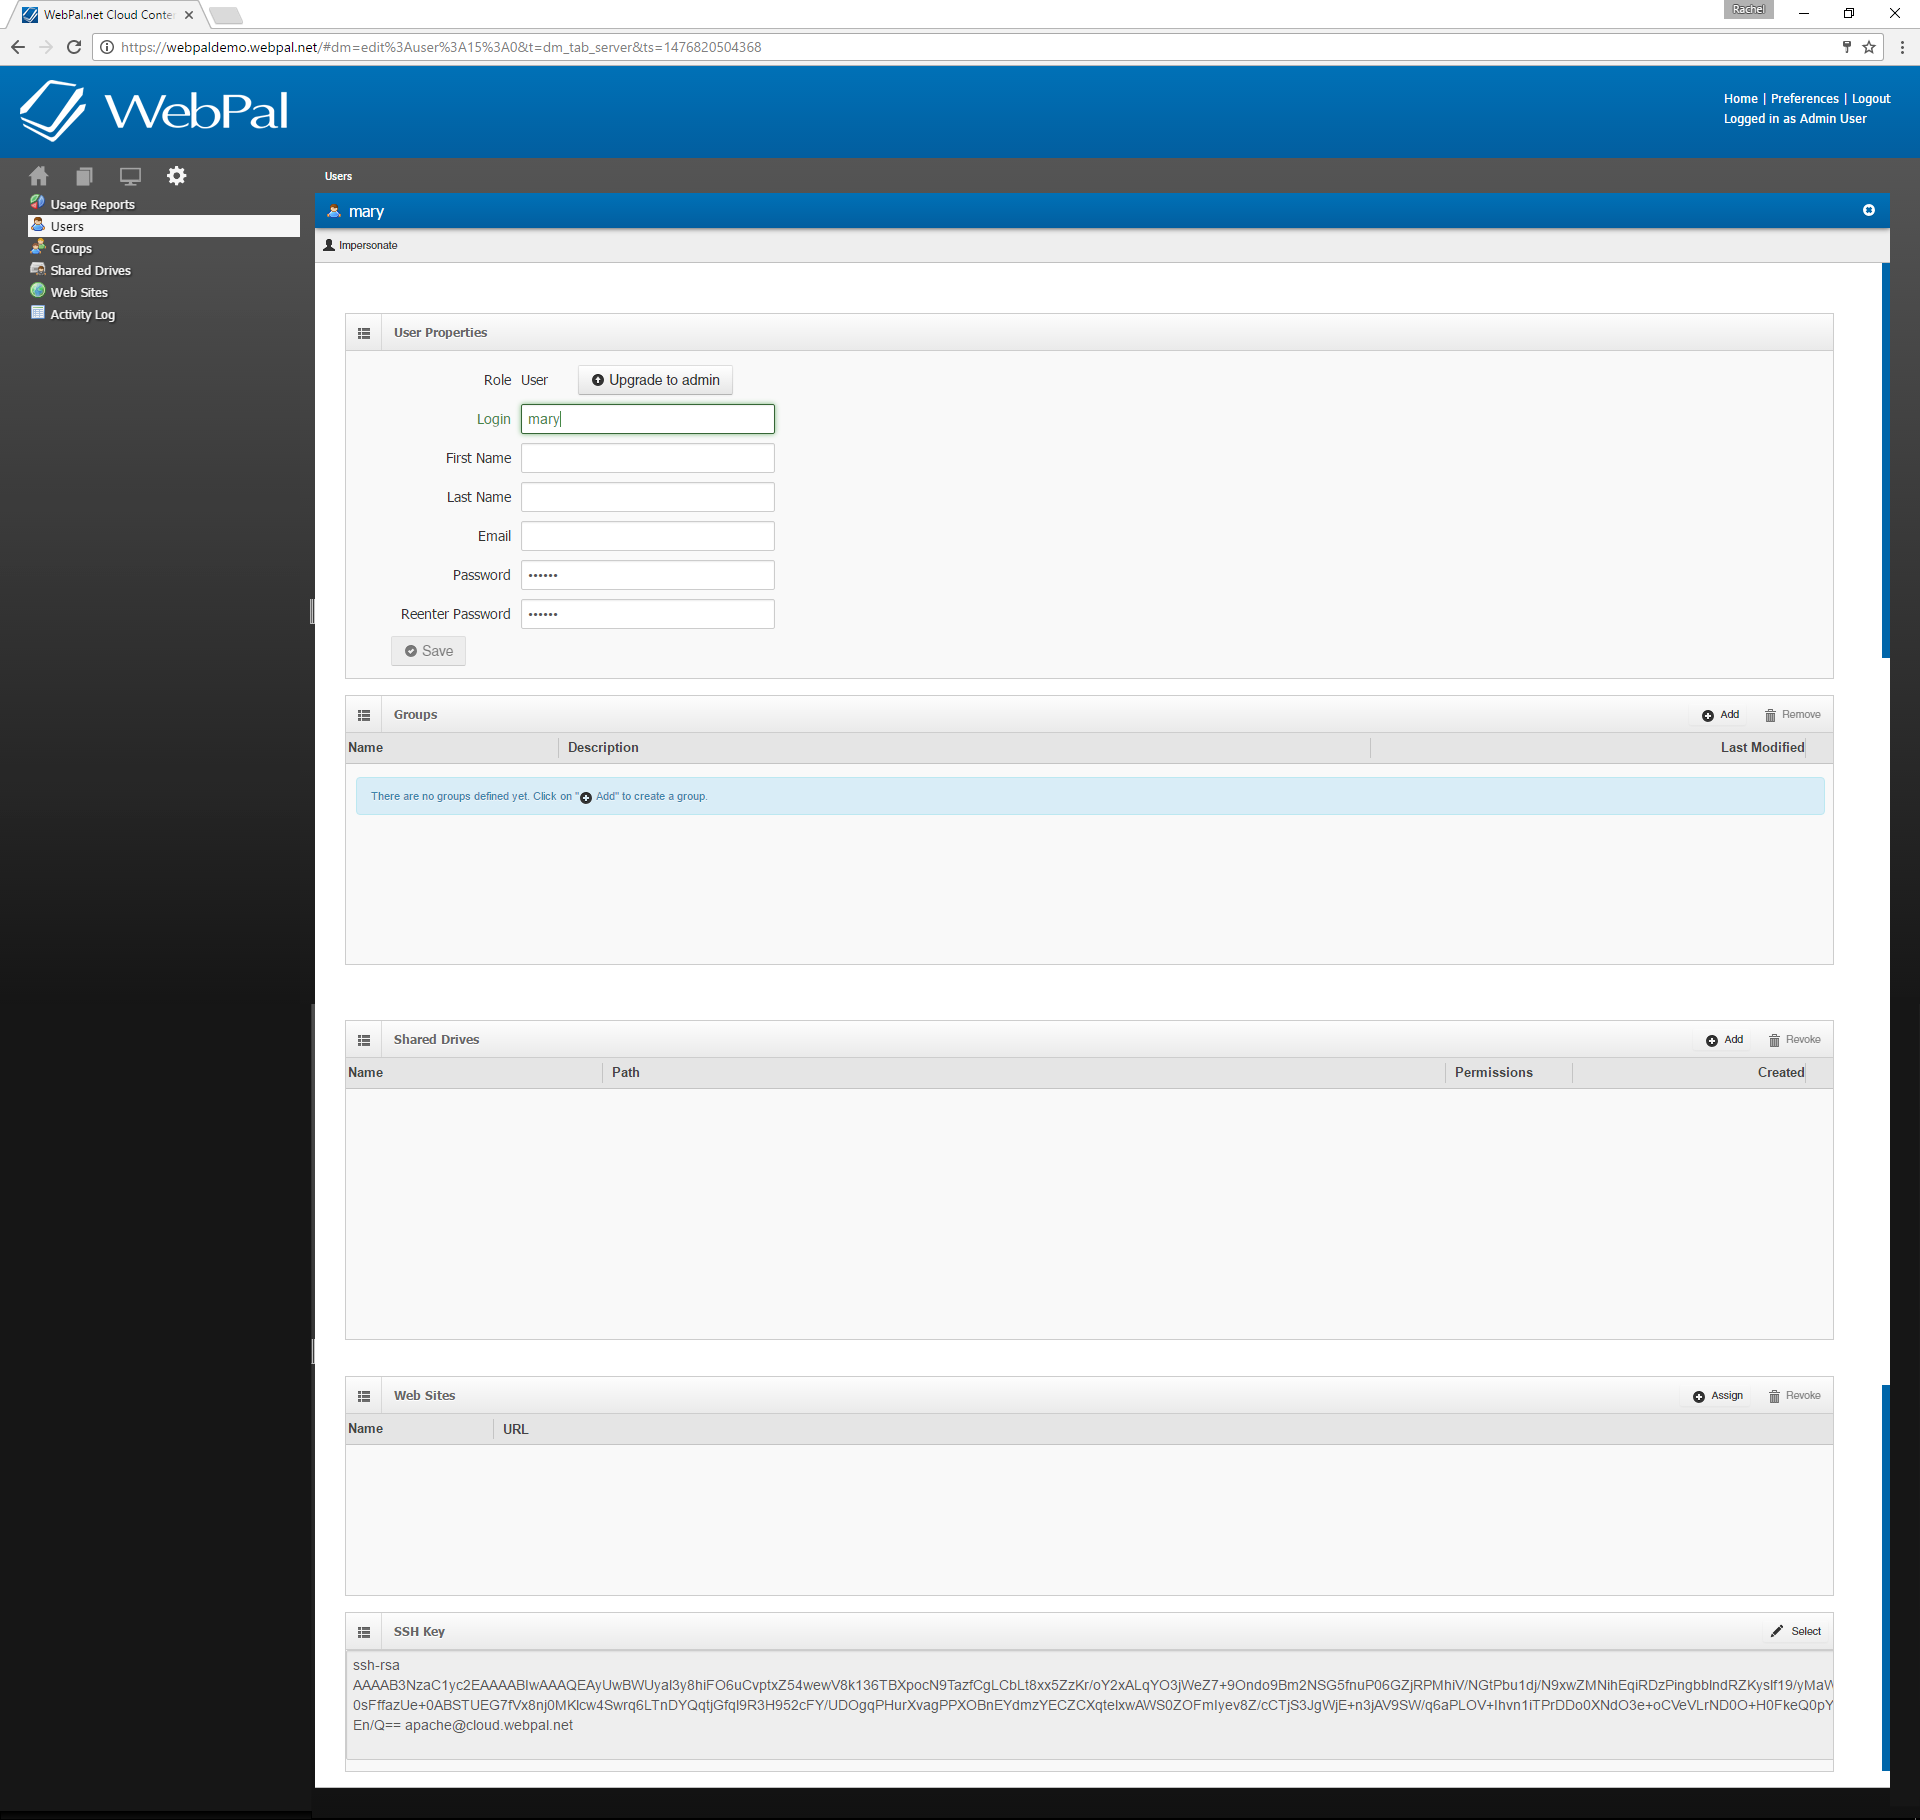 webpal cloud server, add a user to webpal, manage and add users, how to guide